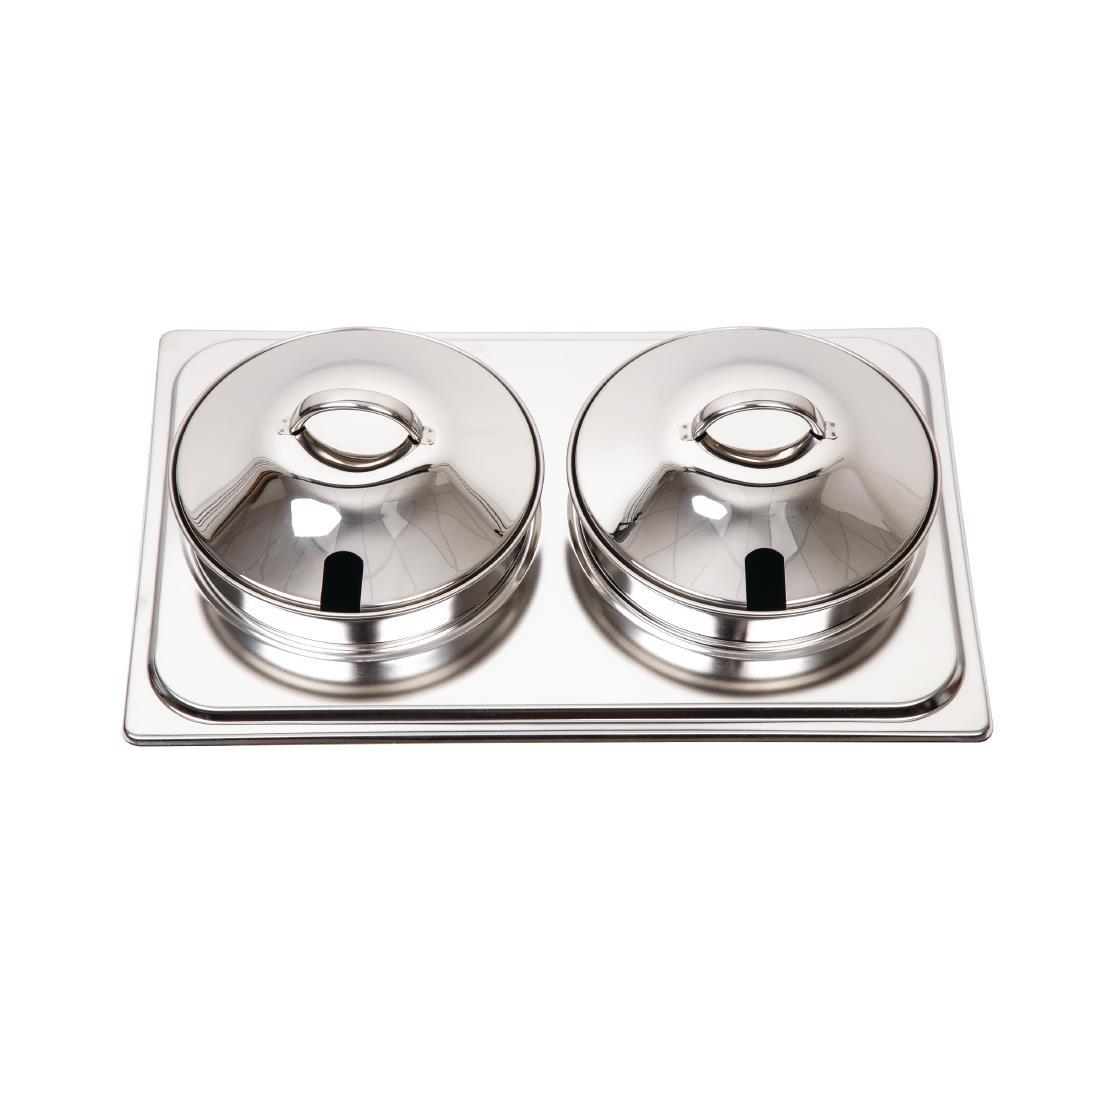 Bain Marie Set for Chafing Dish - CB723  - 2